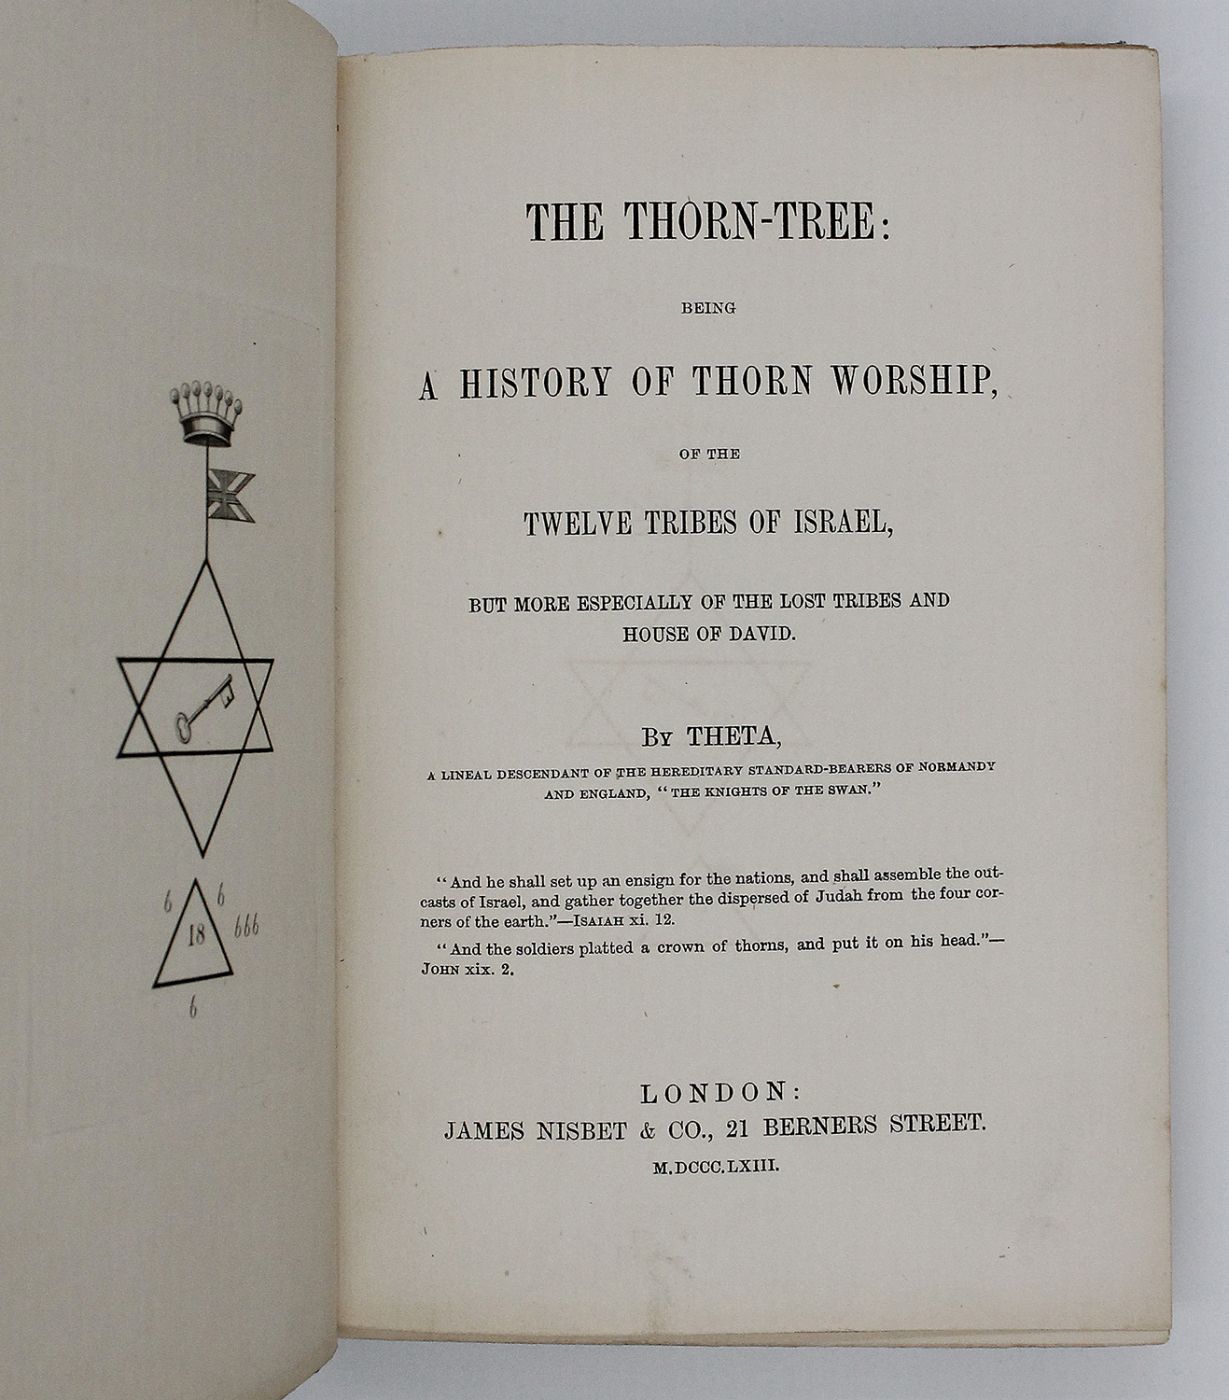 THE THORN-TREE: BEING A HISTORY OF THORN WORSHIP, OF THE TWELVE TRIBES OF ISRAEL, BUT MORE ESPECIALLY OF THE LOST TRIBES AND HOUSE OF DAVID -  image 2